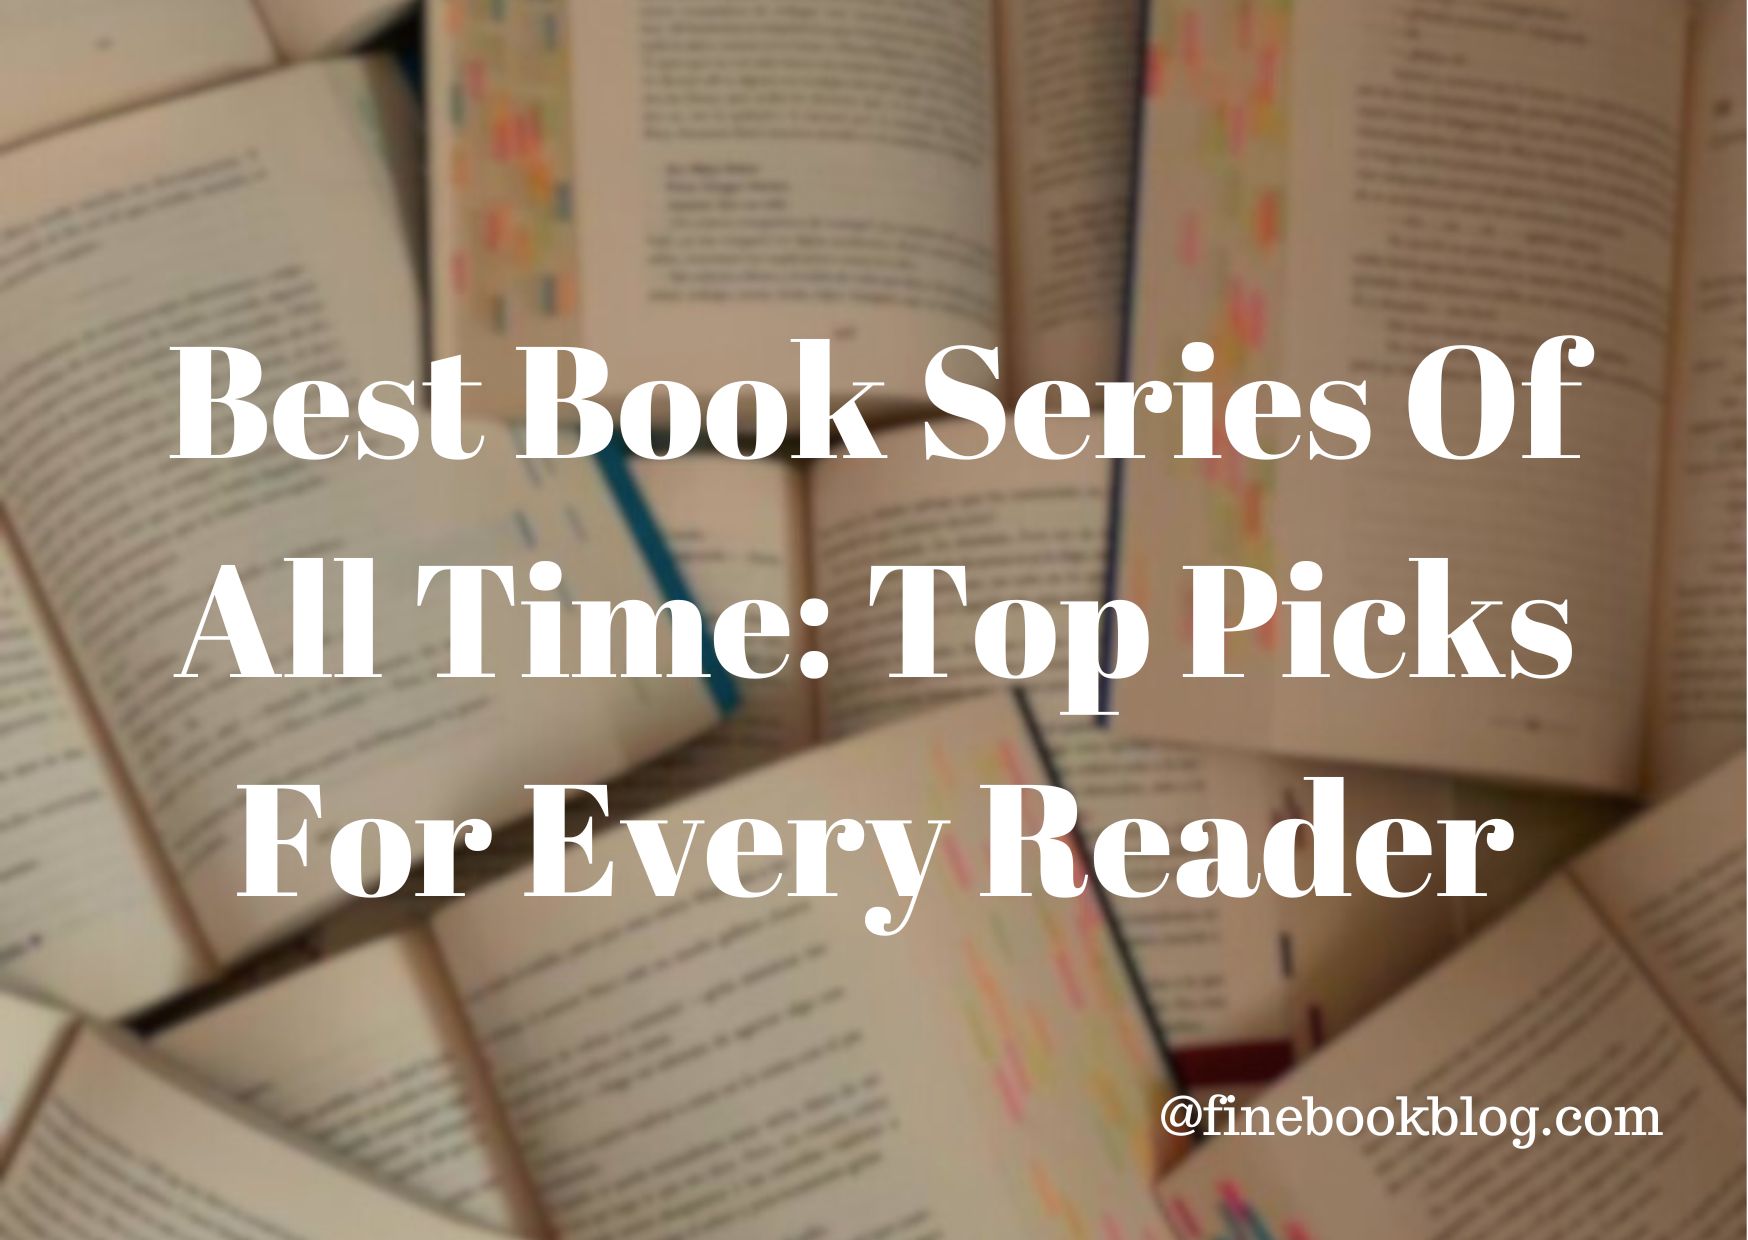 Best-book-series-of-all-time-top-picks-for-everyone